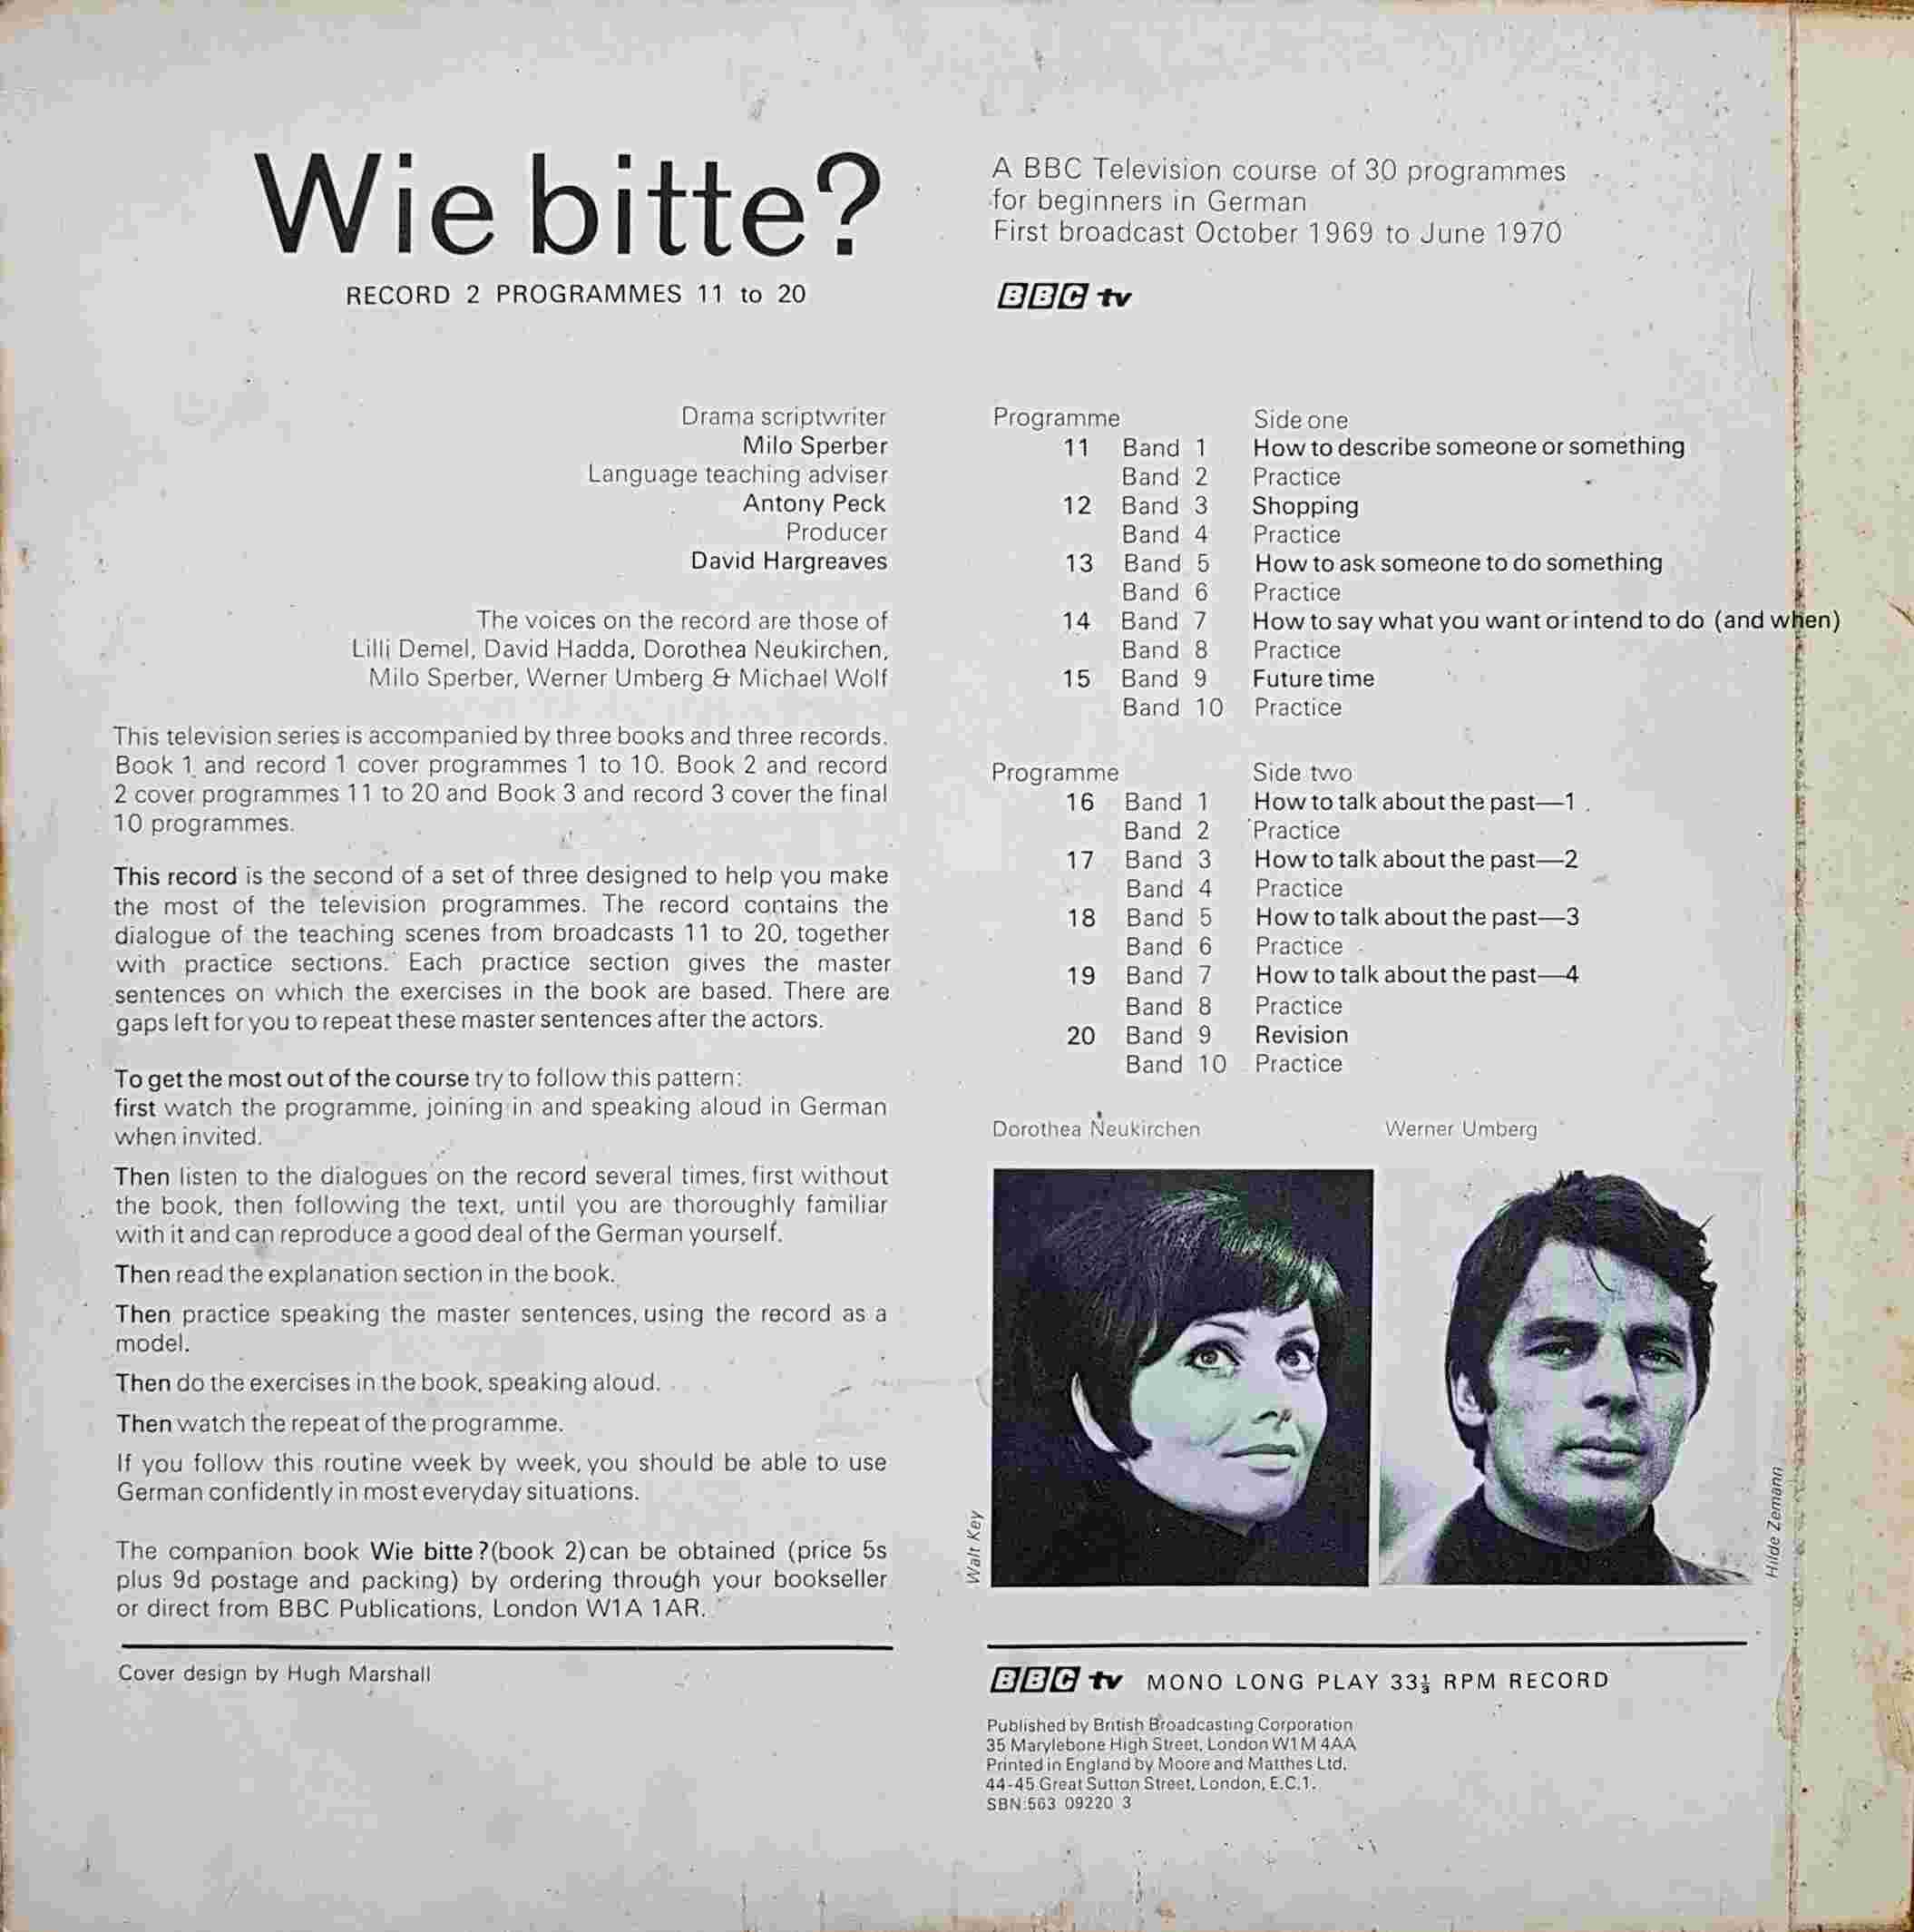 Picture of OP 135/136 Wie bitte? A beginner's course - 2 by artist Milo Sperber / Antony Peck from the BBC records and Tapes library